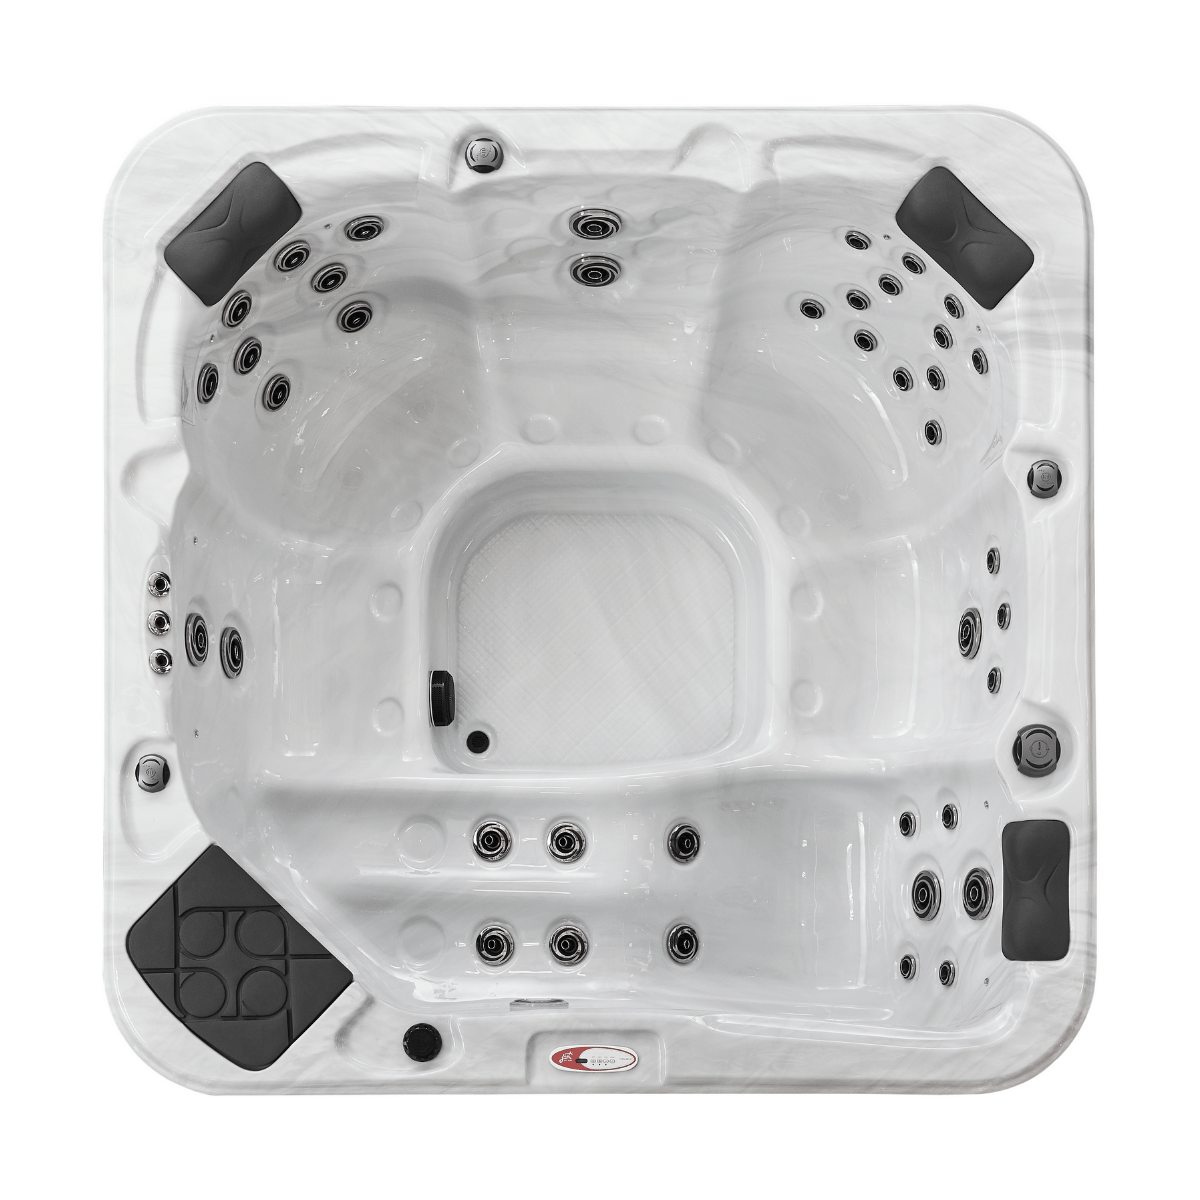 New Forest Hot Tub by Just Hot Tubs